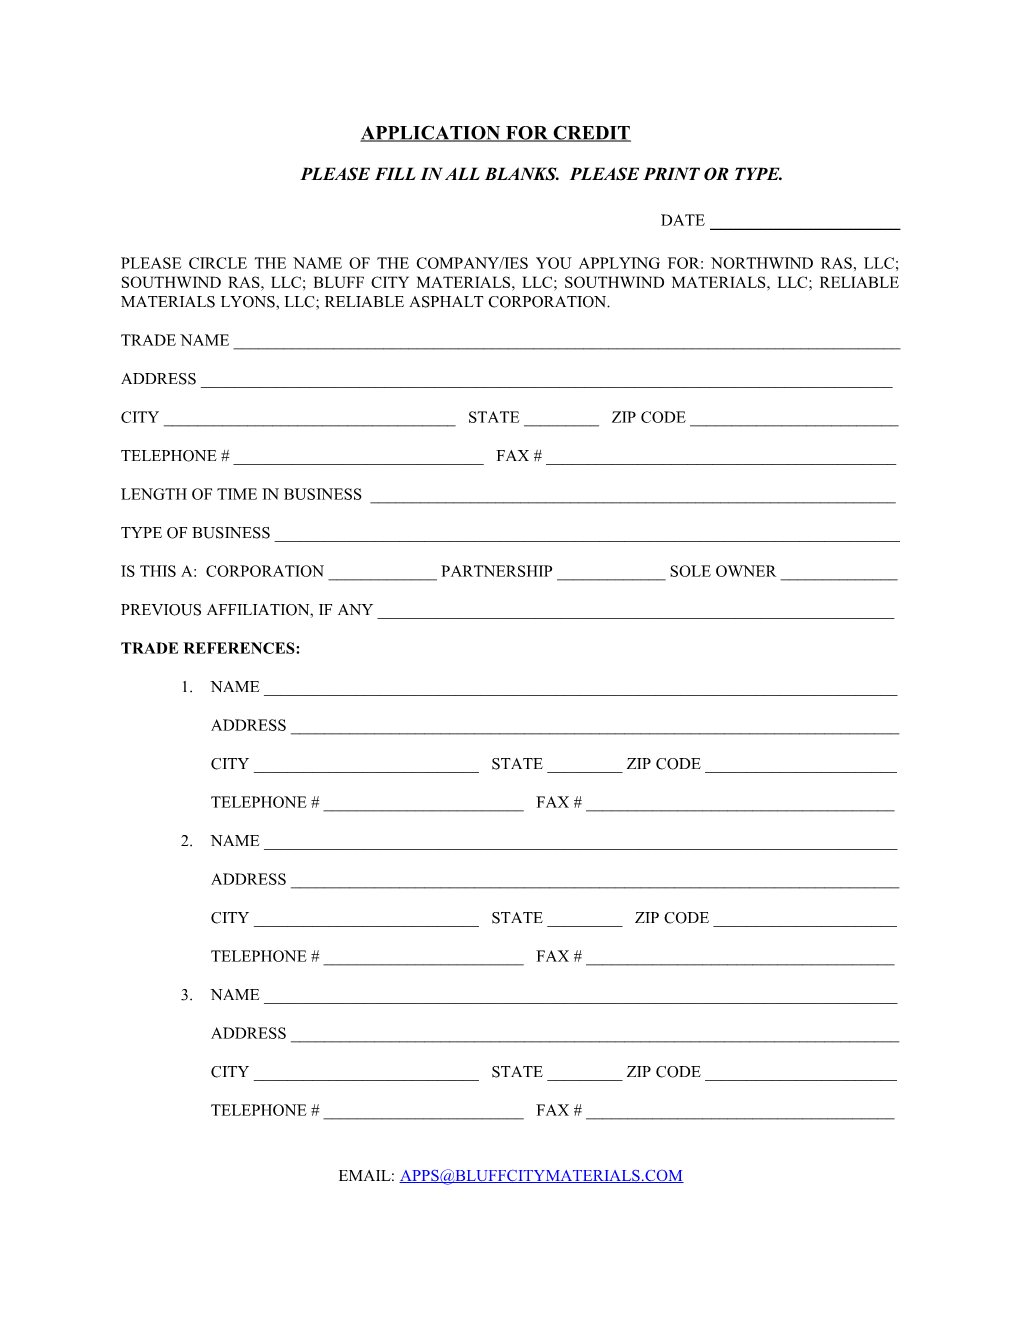 Please Fill in All Blanks. Please Print Or Type